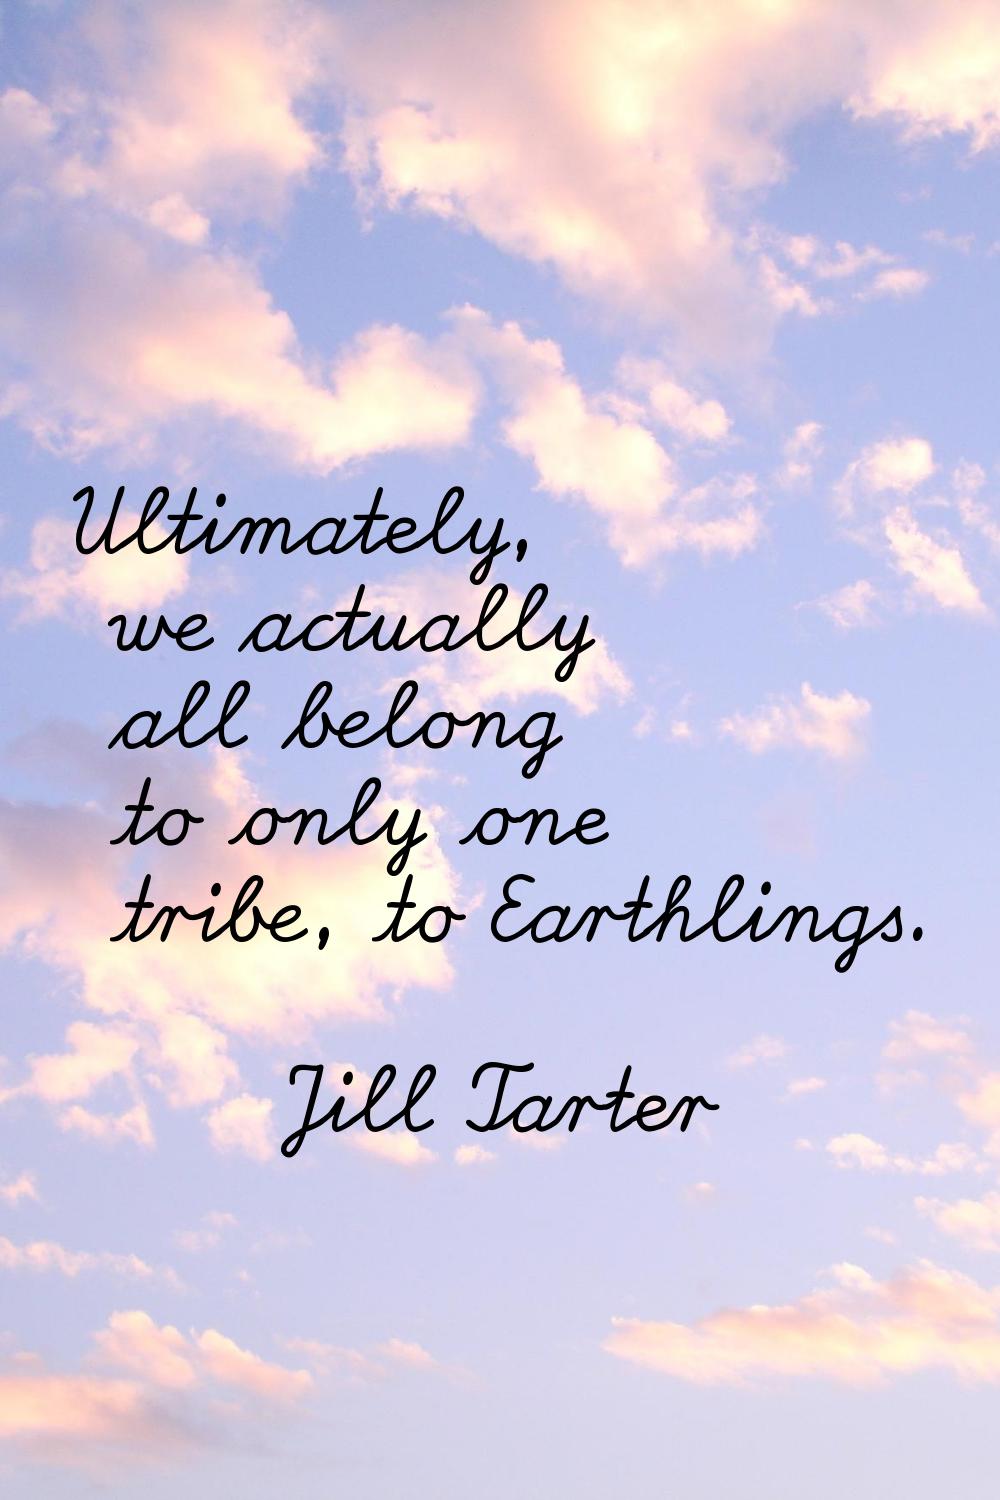 Ultimately, we actually all belong to only one tribe, to Earthlings.